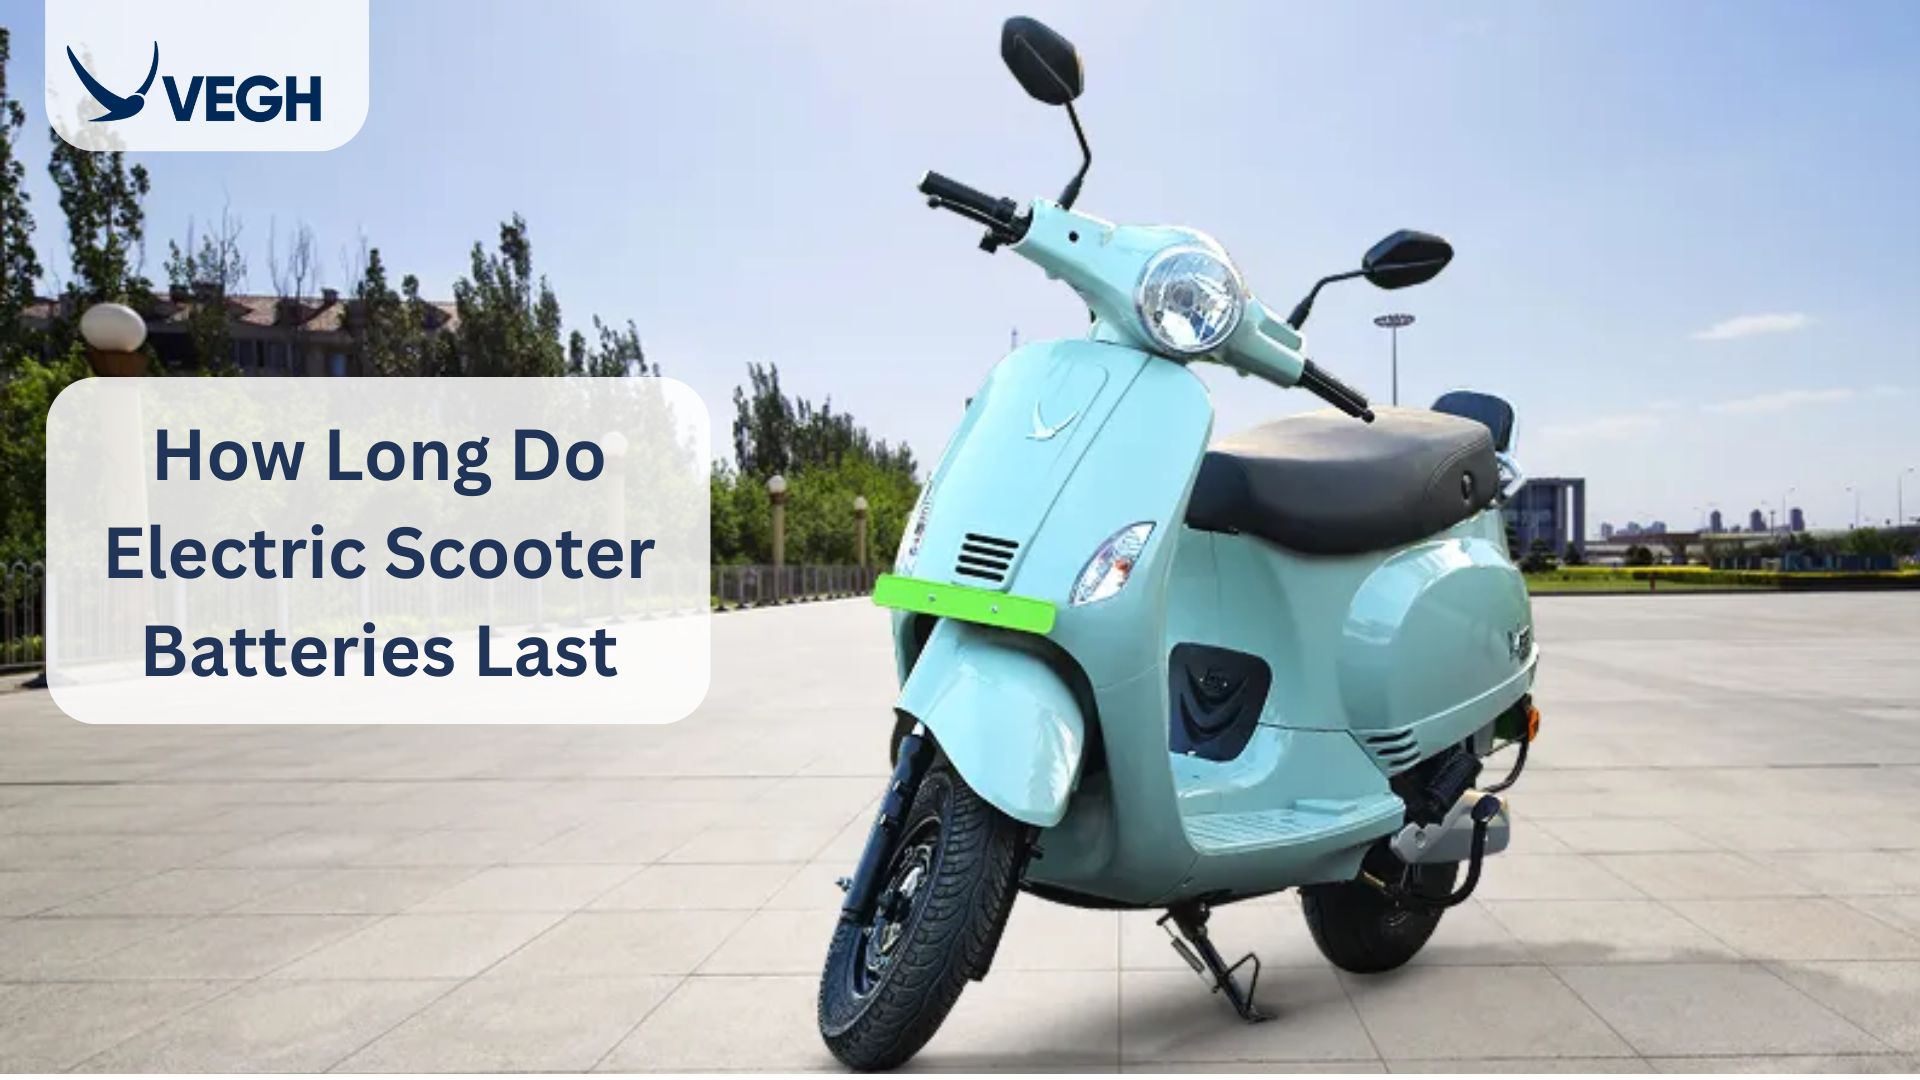 How Long Do Electric Scooter Batteries Last